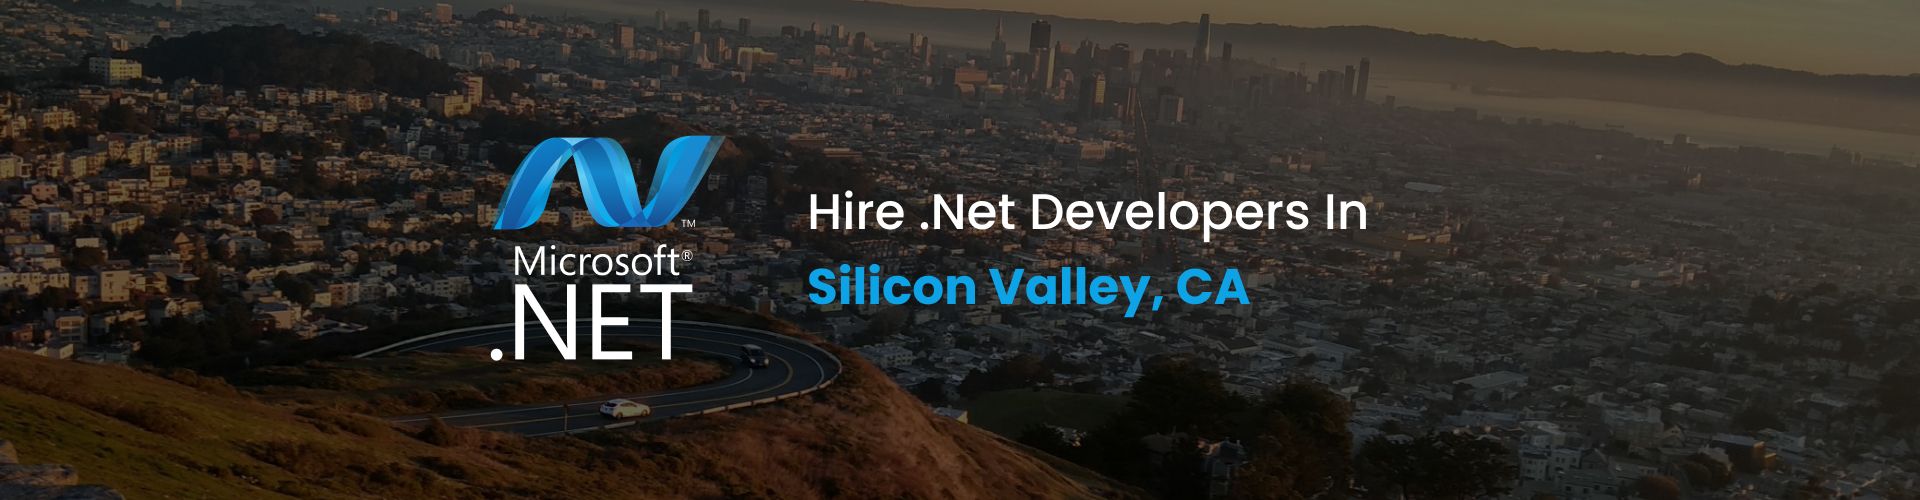 hire dot net developers in silicon valley